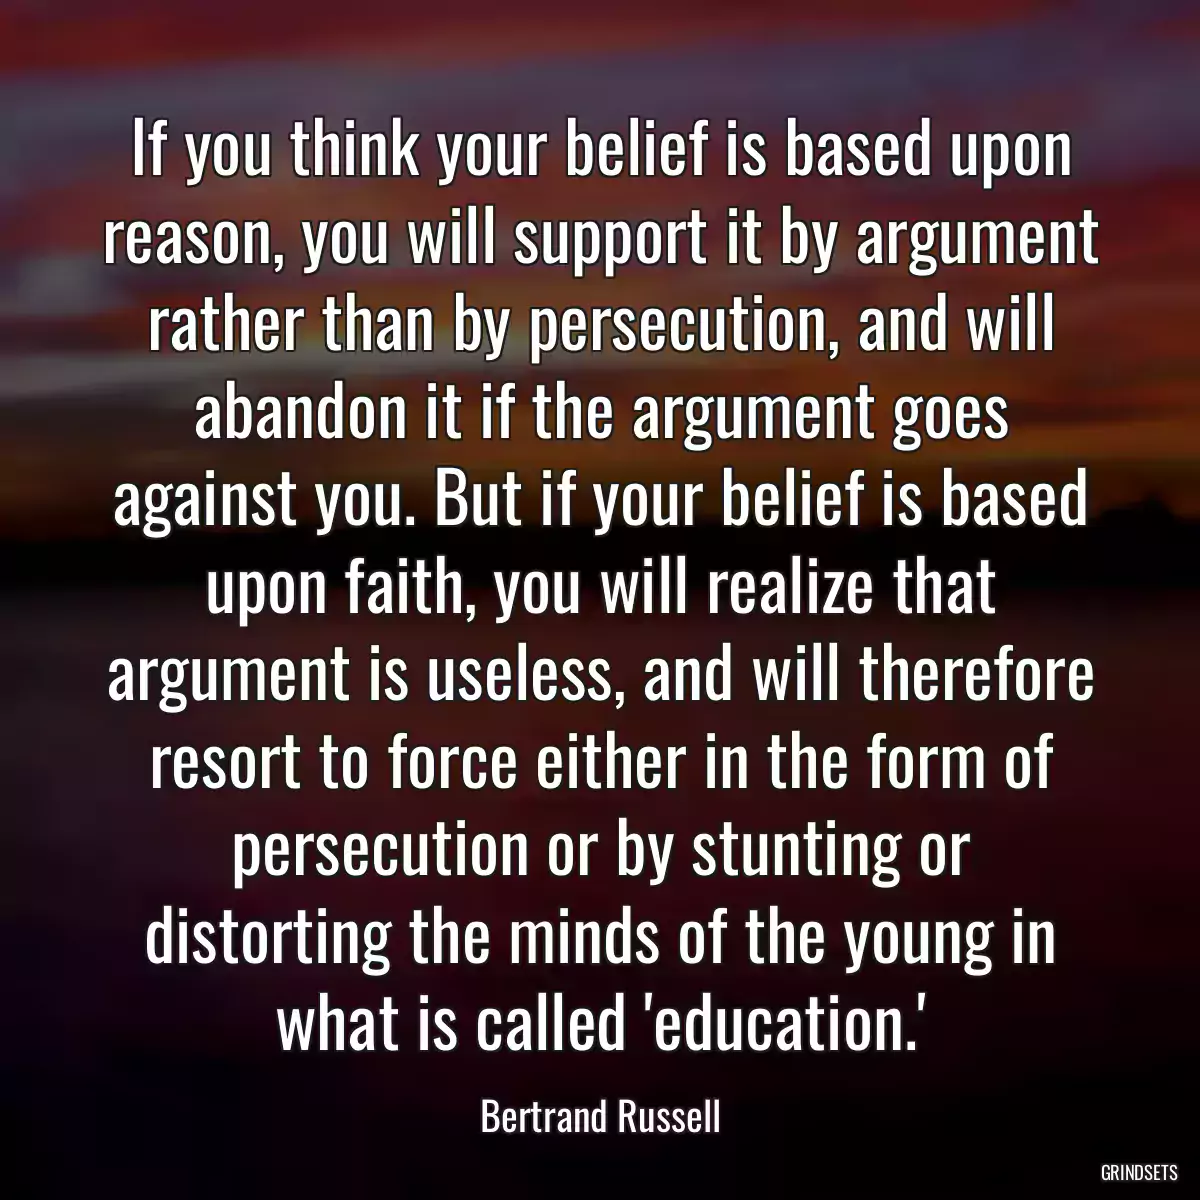 If you think your belief is based upon reason, you will support it by argument rather than by persecution, and will abandon it if the argument goes against you. But if your belief is based upon faith, you will realize that argument is useless, and will therefore resort to force either in the form of persecution or by stunting or distorting the minds of the young in what is called \'education.\'